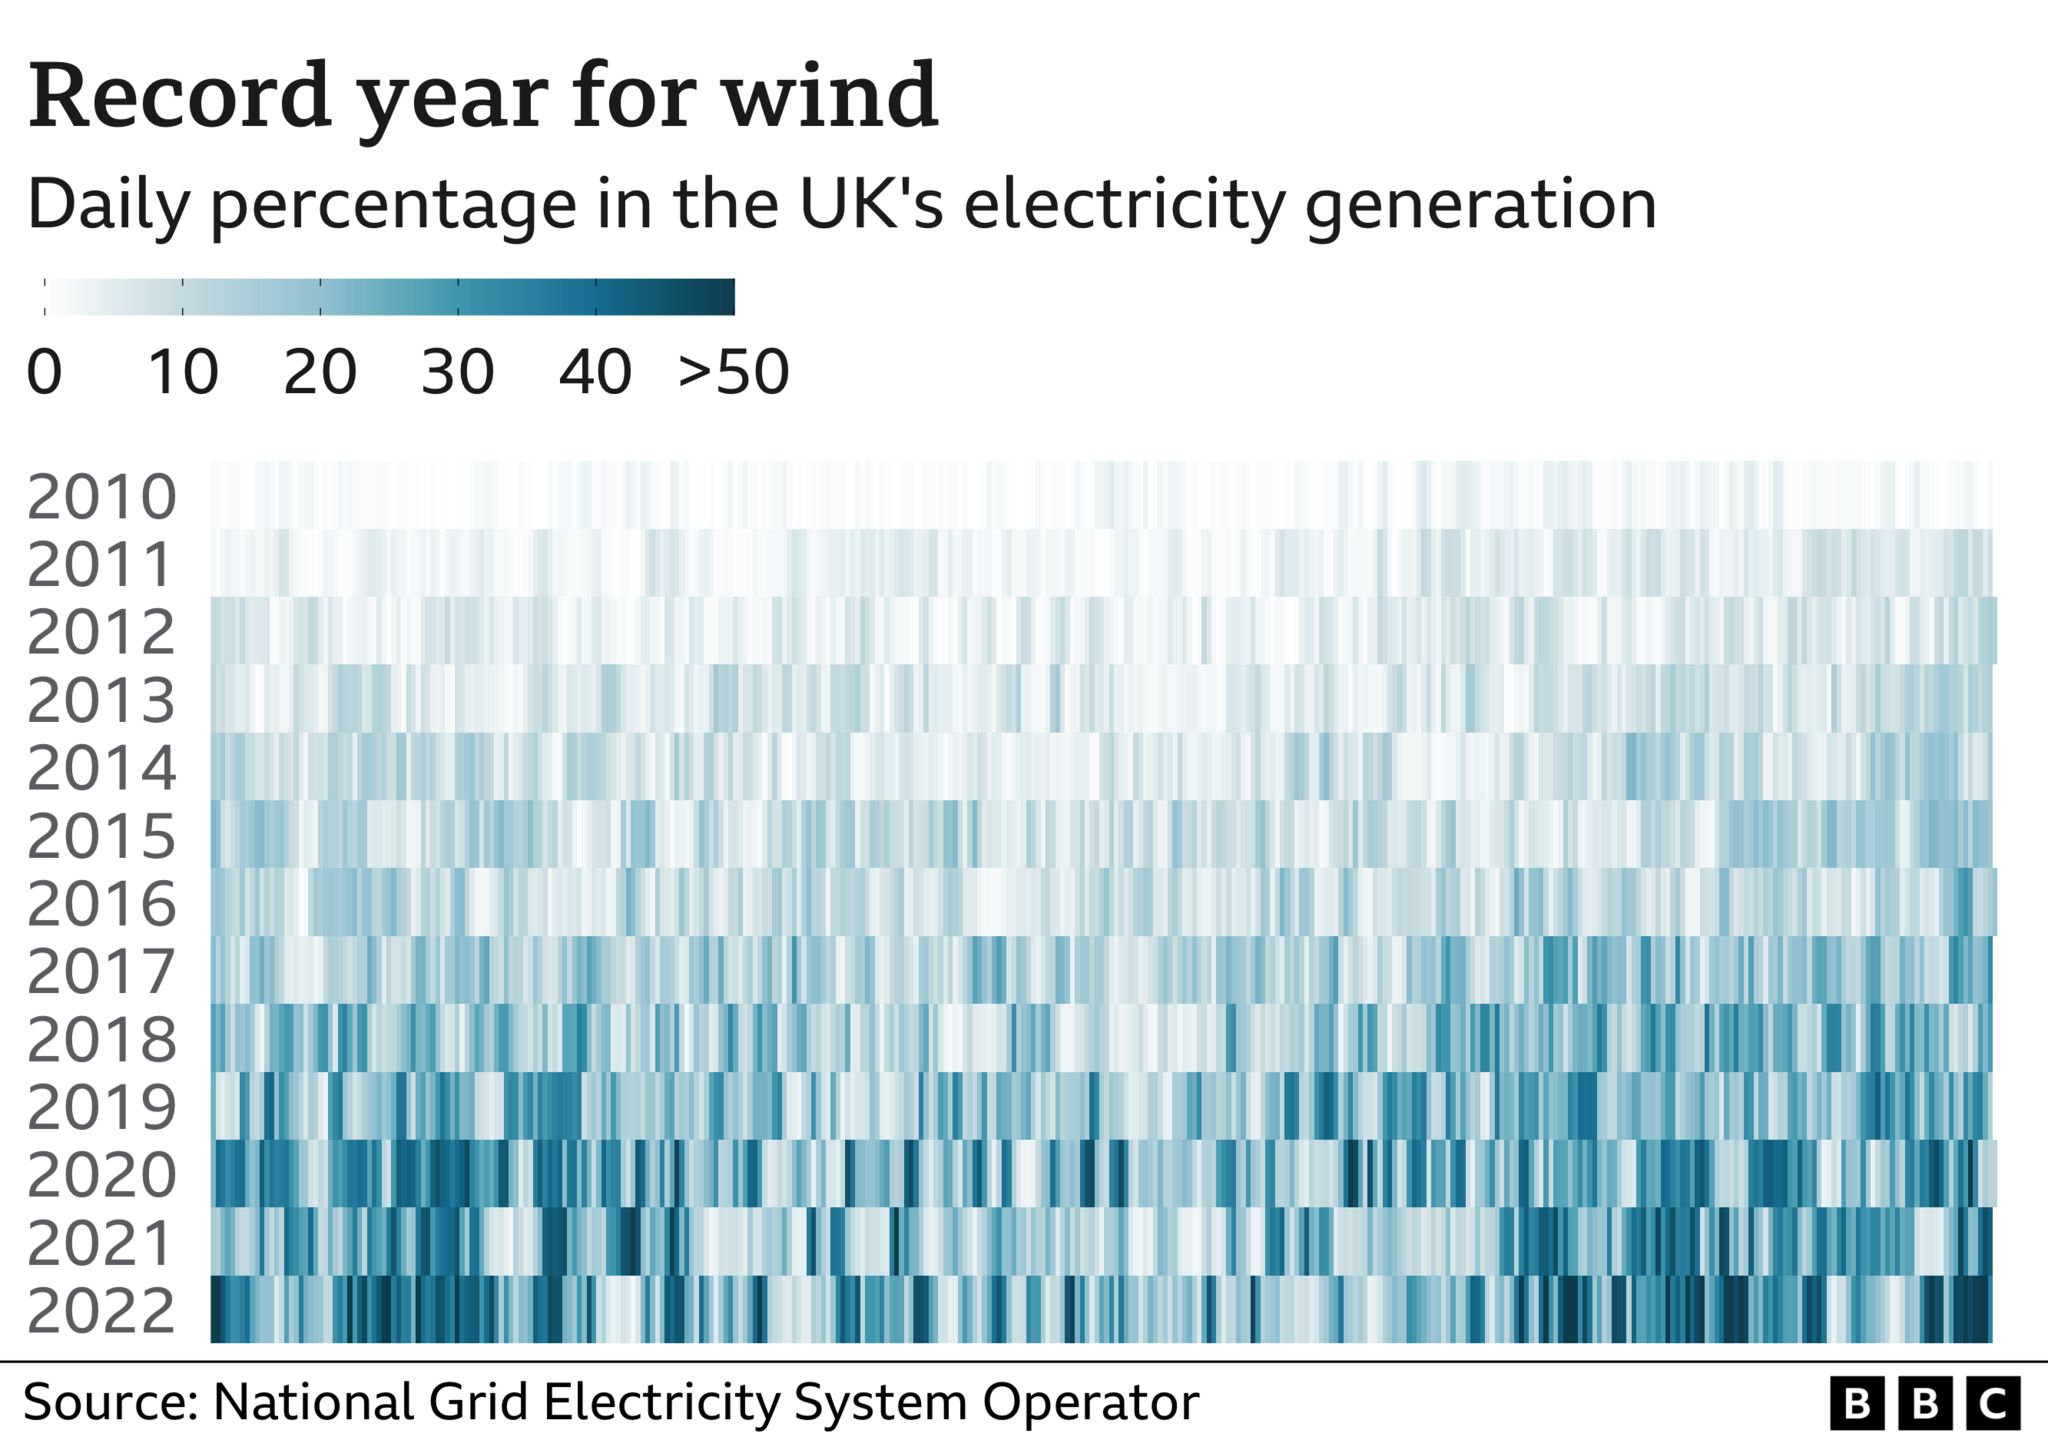 Wind power has been increasing in Great Britain since 2010